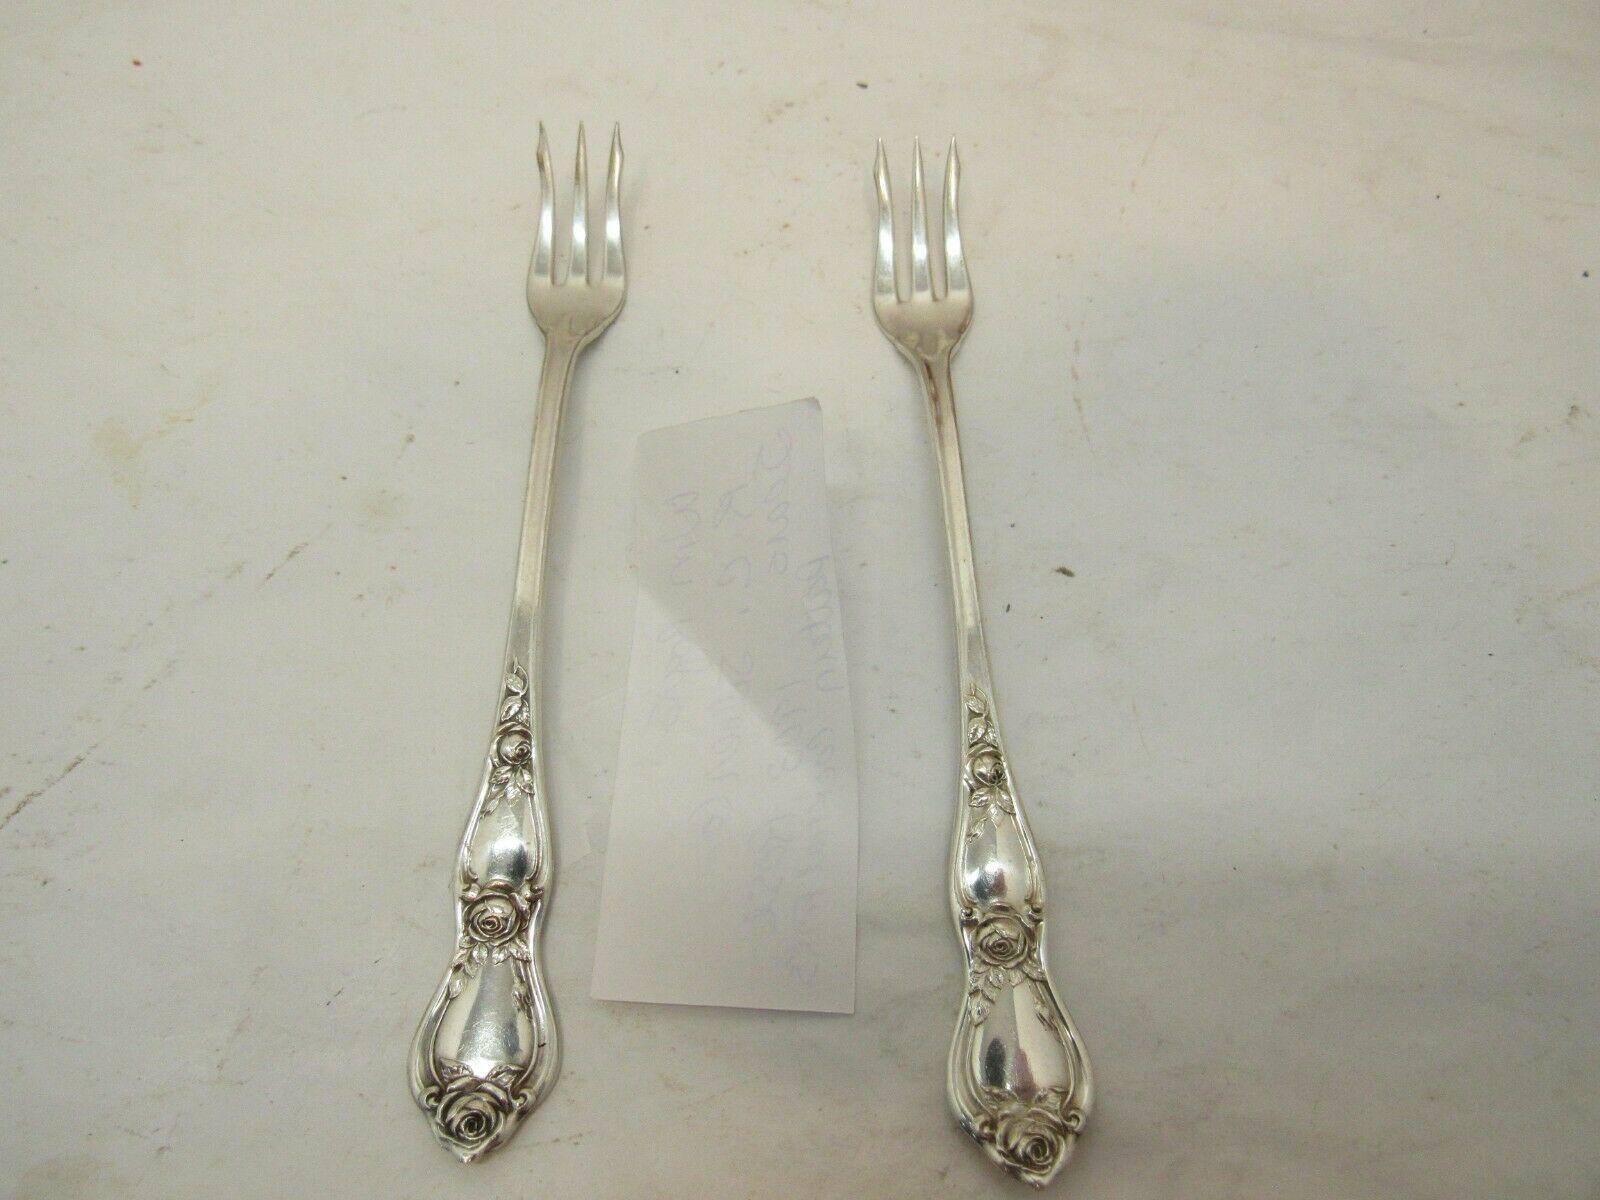 2 WM Rogers Silverplate Cocktail Forks 5 3/4'' 1903 Rose Pattern R.C.Silver Co - $12.86